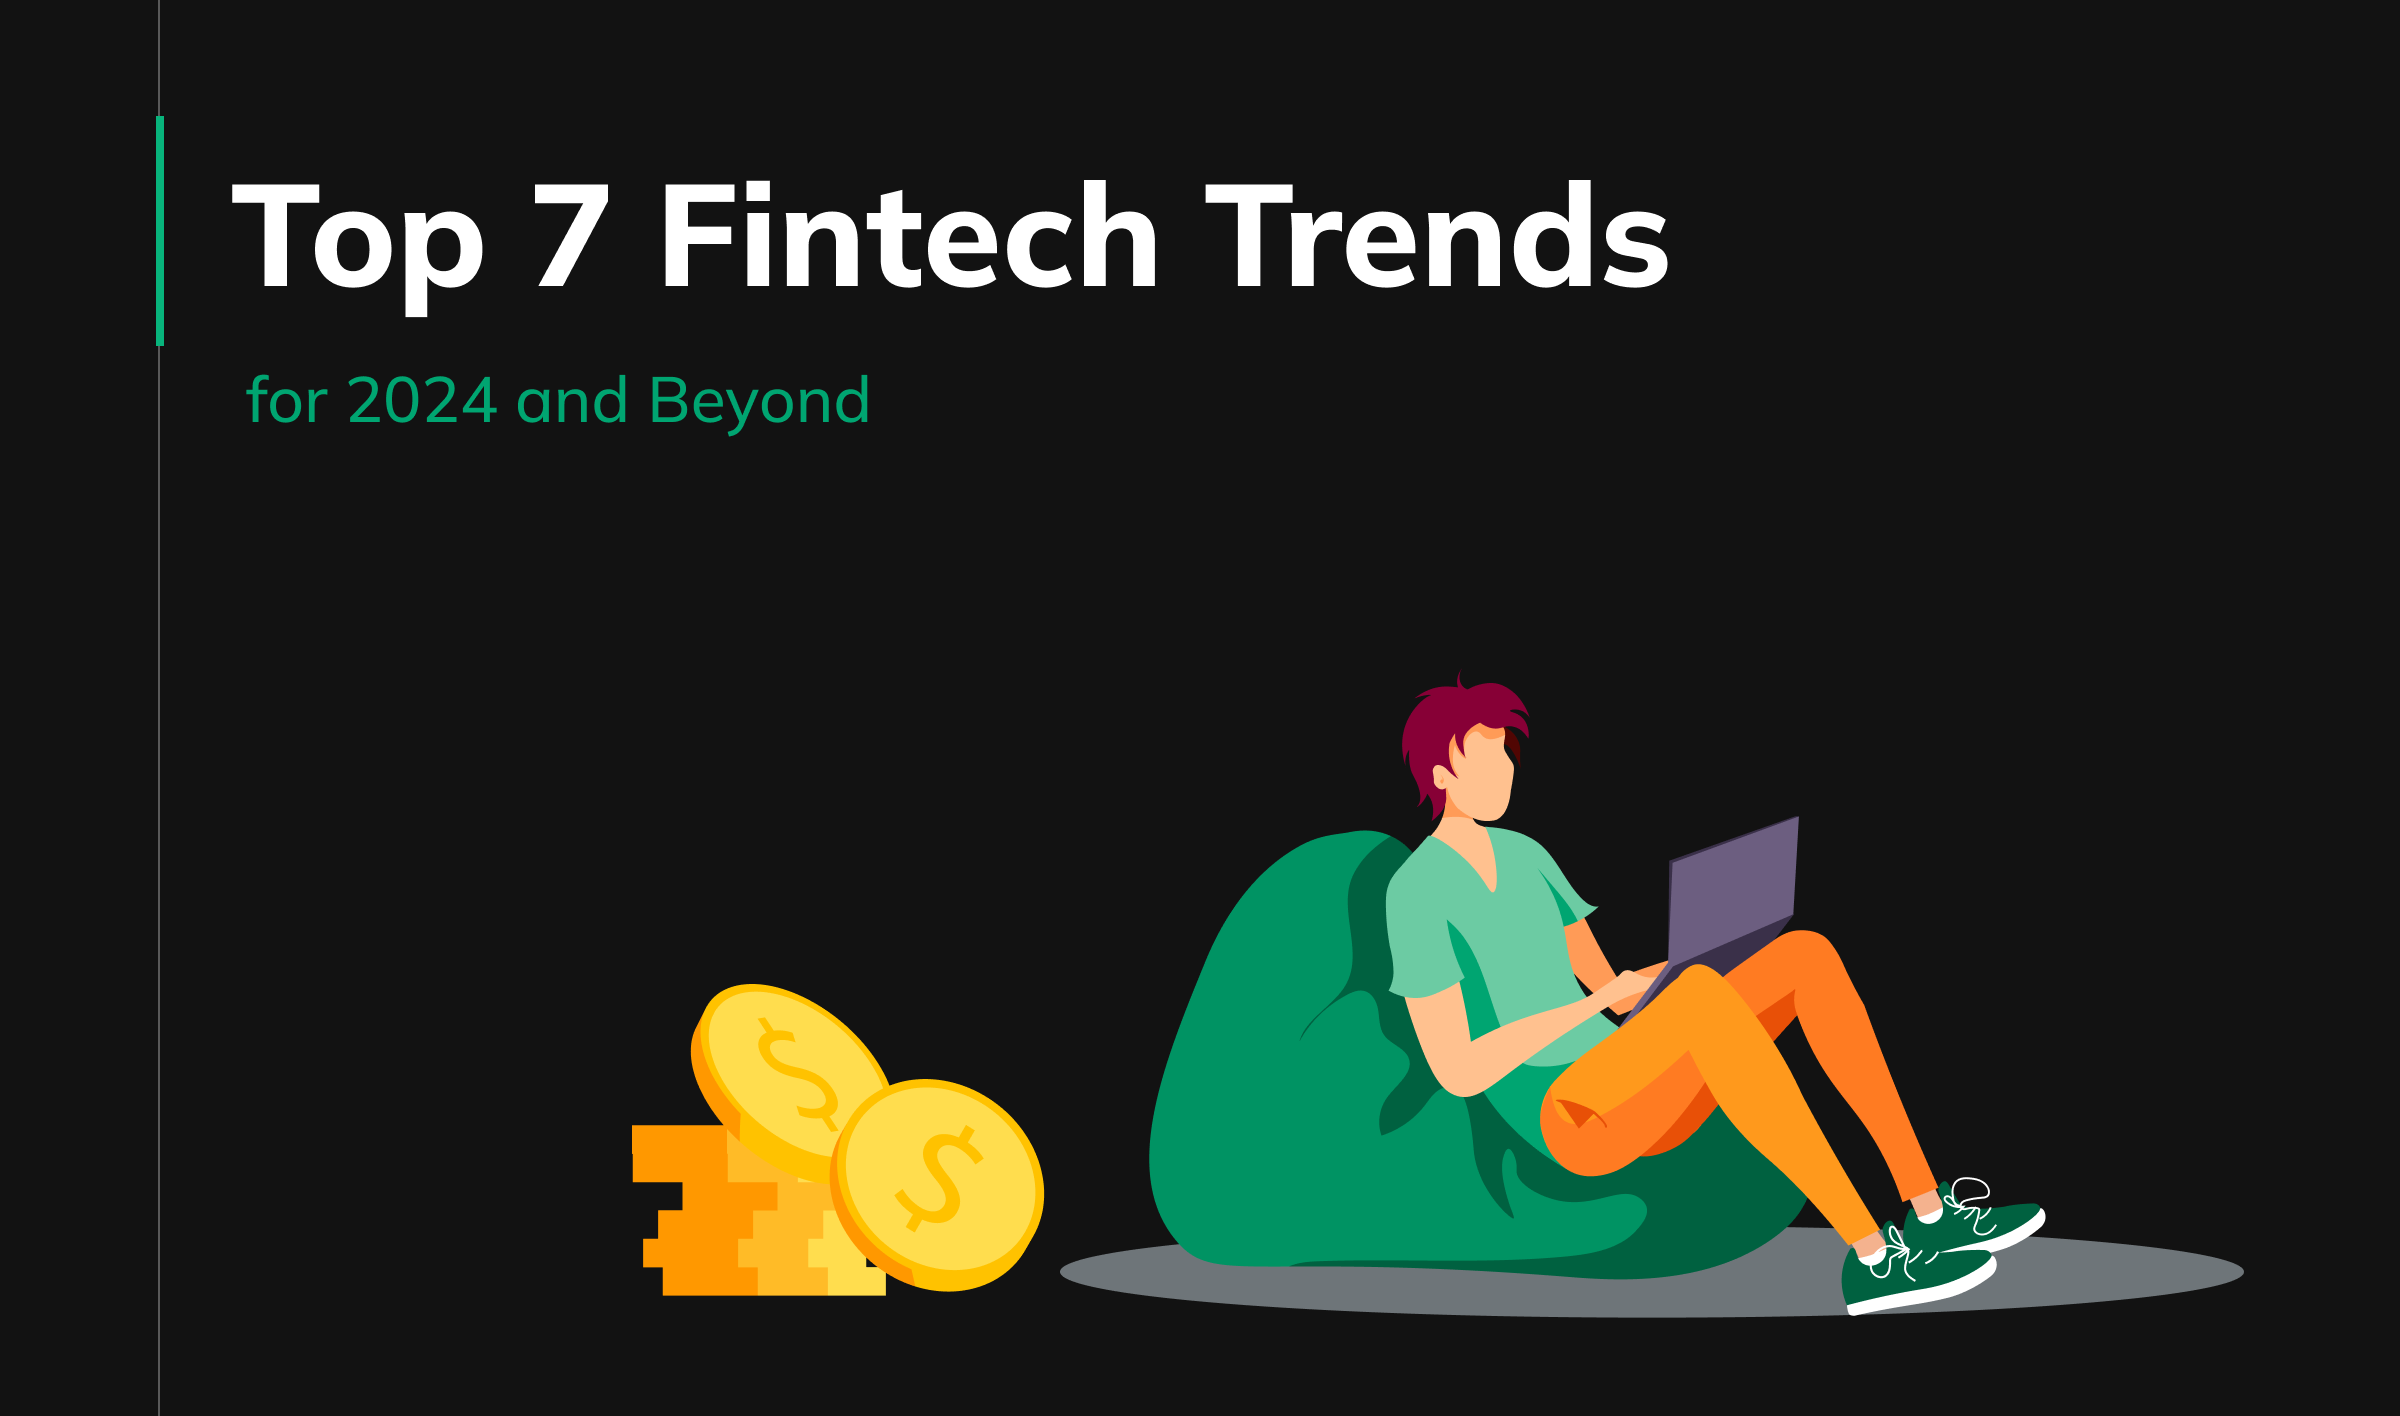 Top 7 Fintech Trends for 2024 and beyond